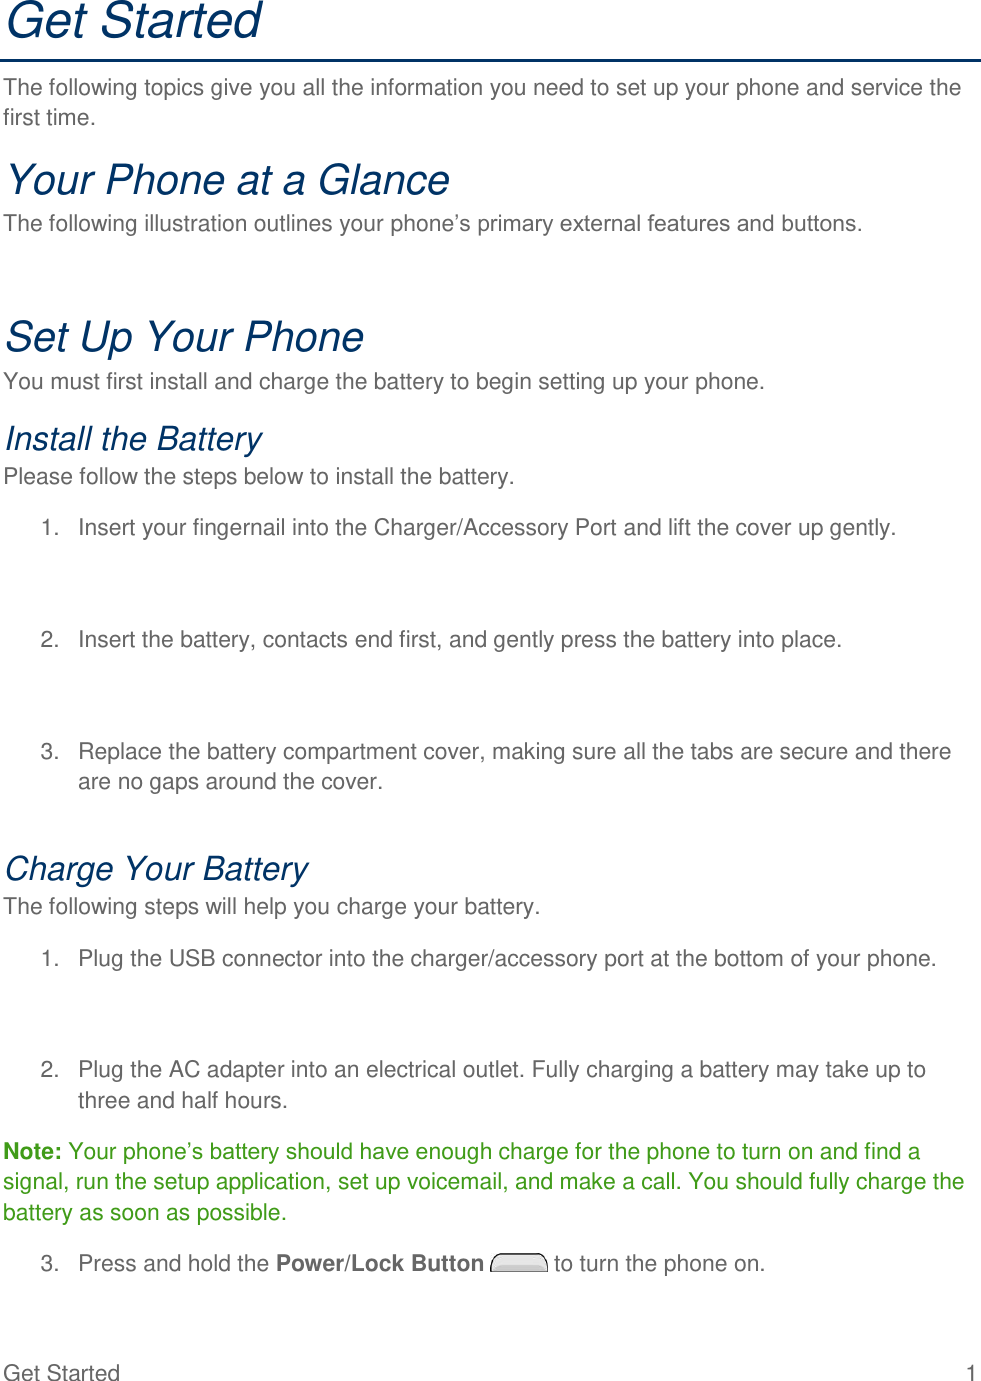 Get Started  1 Get Started The following topics give you all the information you need to set up your phone and service the first time. Your Phone at a Glance The following illustration outlines your phone‘s primary external features and buttons.  Set Up Your Phone You must first install and charge the battery to begin setting up your phone. Install the Battery Please follow the steps below to install the battery. 1.  Insert your fingernail into the Charger/Accessory Port and lift the cover up gently.   2.  Insert the battery, contacts end first, and gently press the battery into place.   3.  Replace the battery compartment cover, making sure all the tabs are secure and there are no gaps around the cover.  Charge Your Battery The following steps will help you charge your battery. 1.  Plug the USB connector into the charger/accessory port at the bottom of your phone.   2.  Plug the AC adapter into an electrical outlet. Fully charging a battery may take up to three and half hours. Note: Your phone‘s battery should have enough charge for the phone to turn on and find a signal, run the setup application, set up voicemail, and make a call. You should fully charge the battery as soon as possible. 3.  Press and hold the Power/Lock Button   to turn the phone on. 